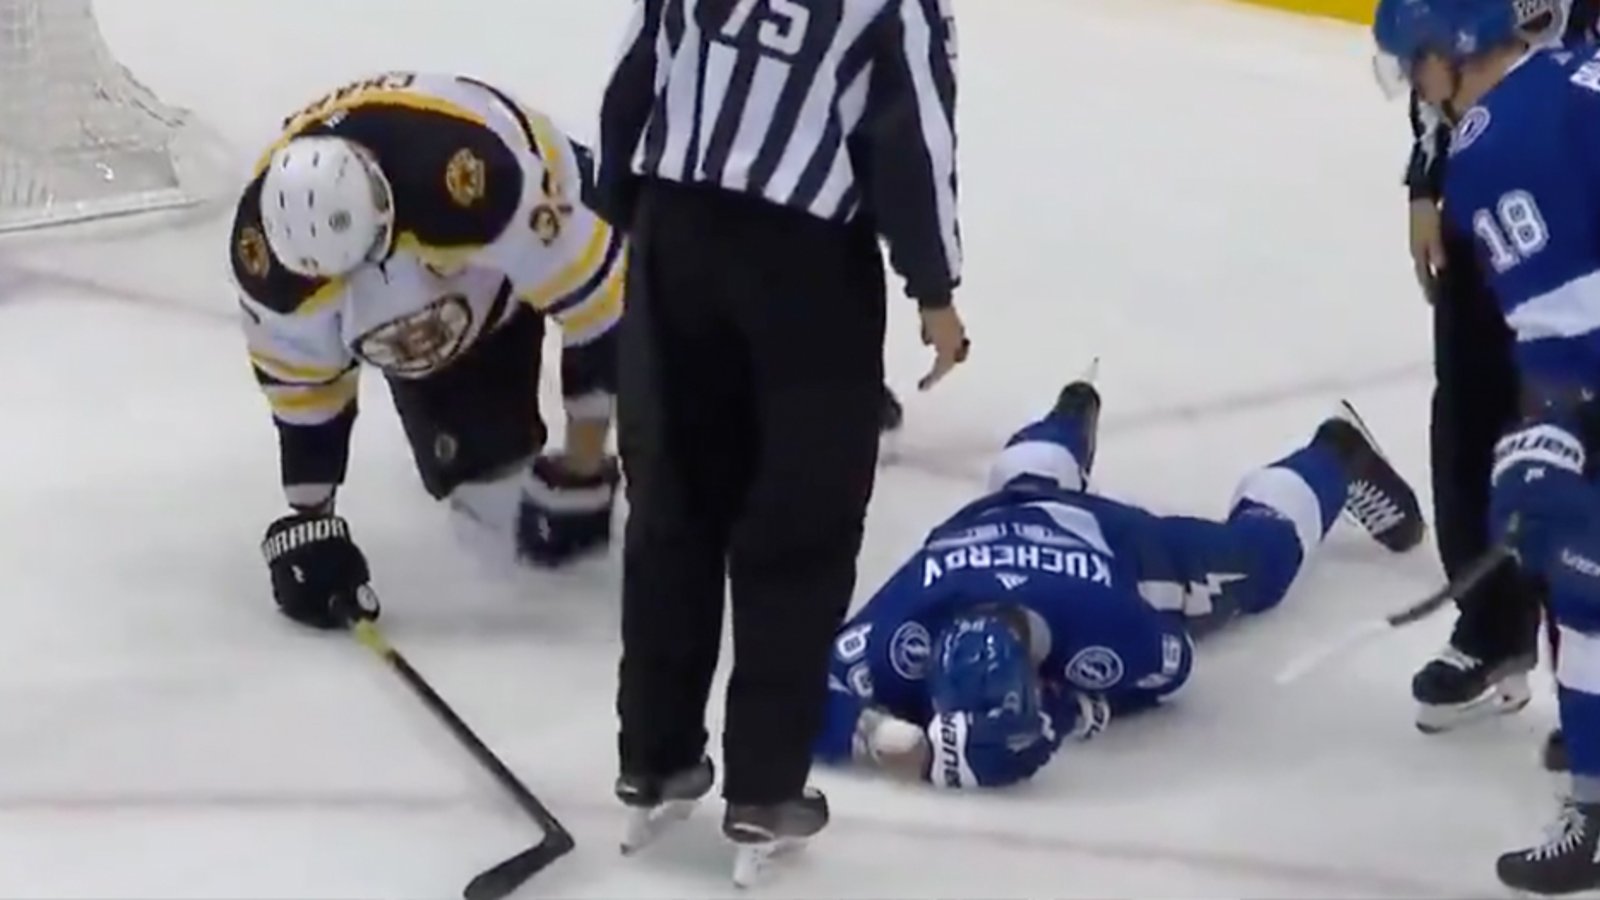 Kucherov leaves the game after taking a brutal high stick to the face from Chara